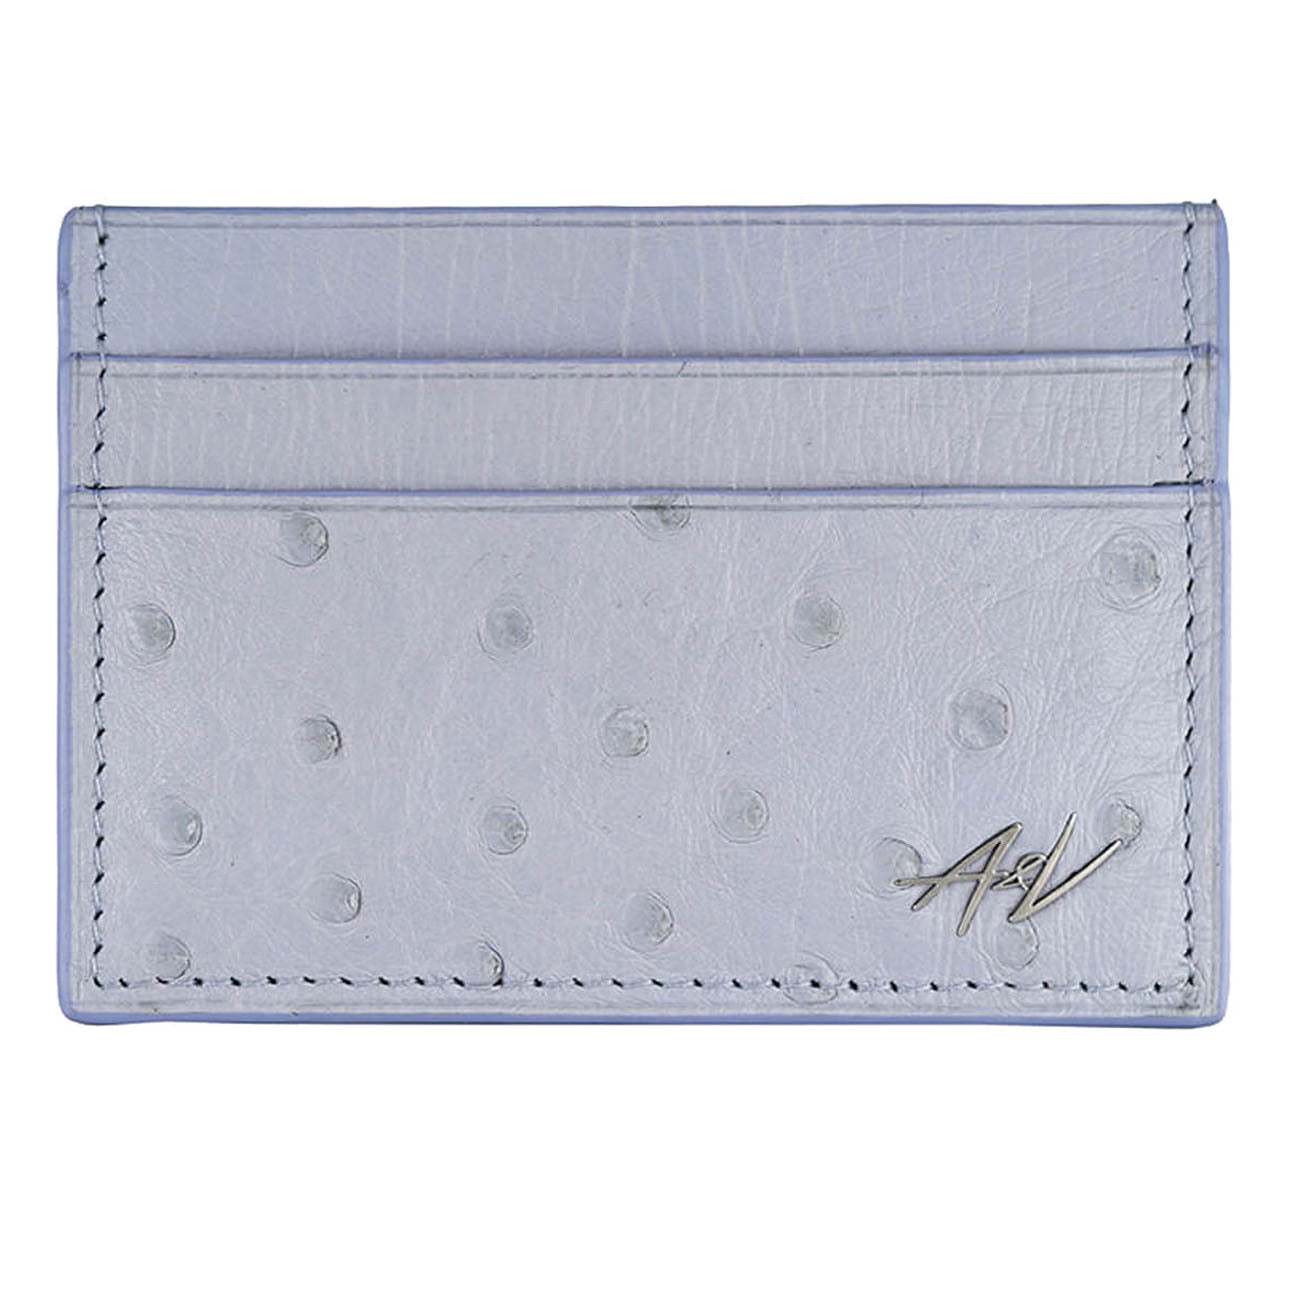 CARD HOLDER OSTRICH LEATHER BLUE ICE